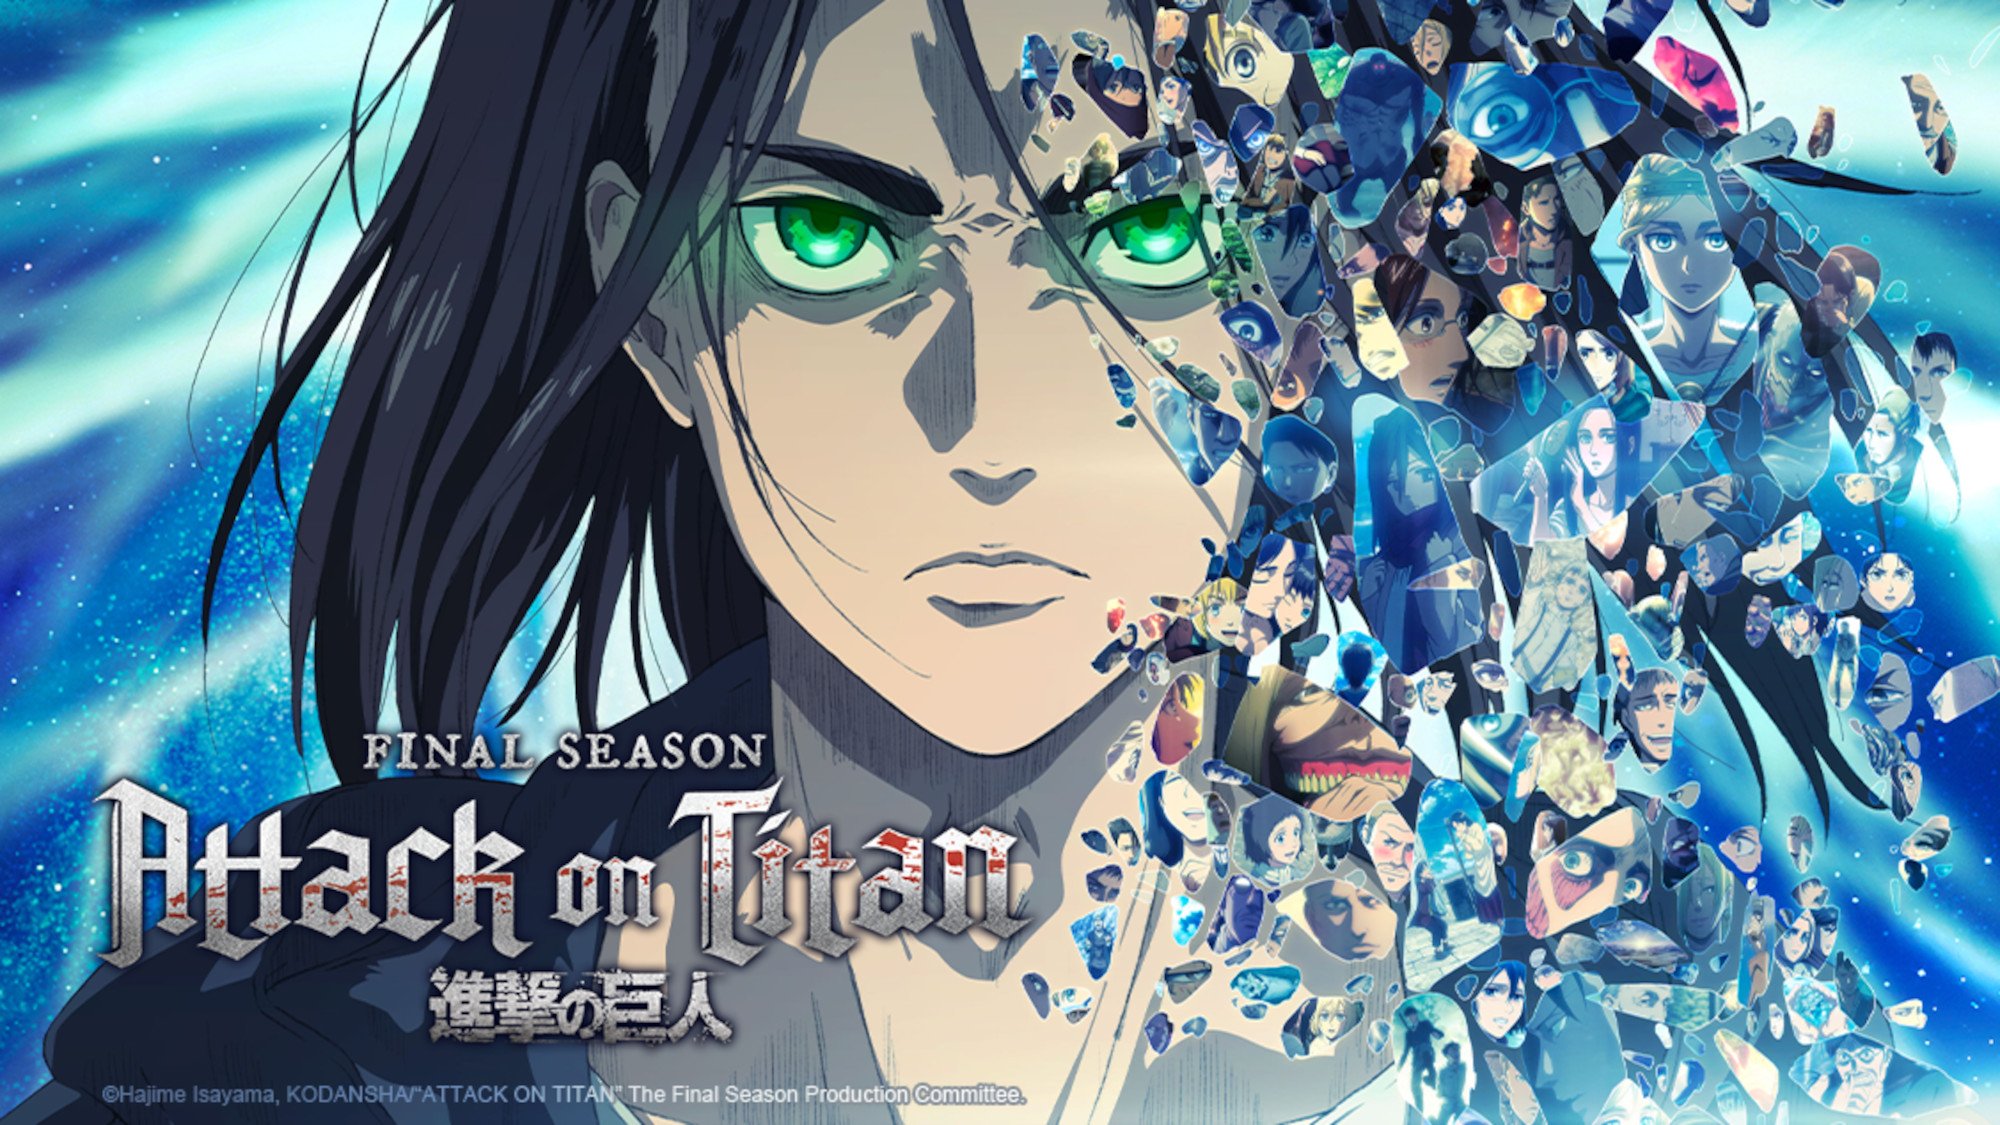 Attack on Titan: The Final Season' Part 2 is arriving January 2022